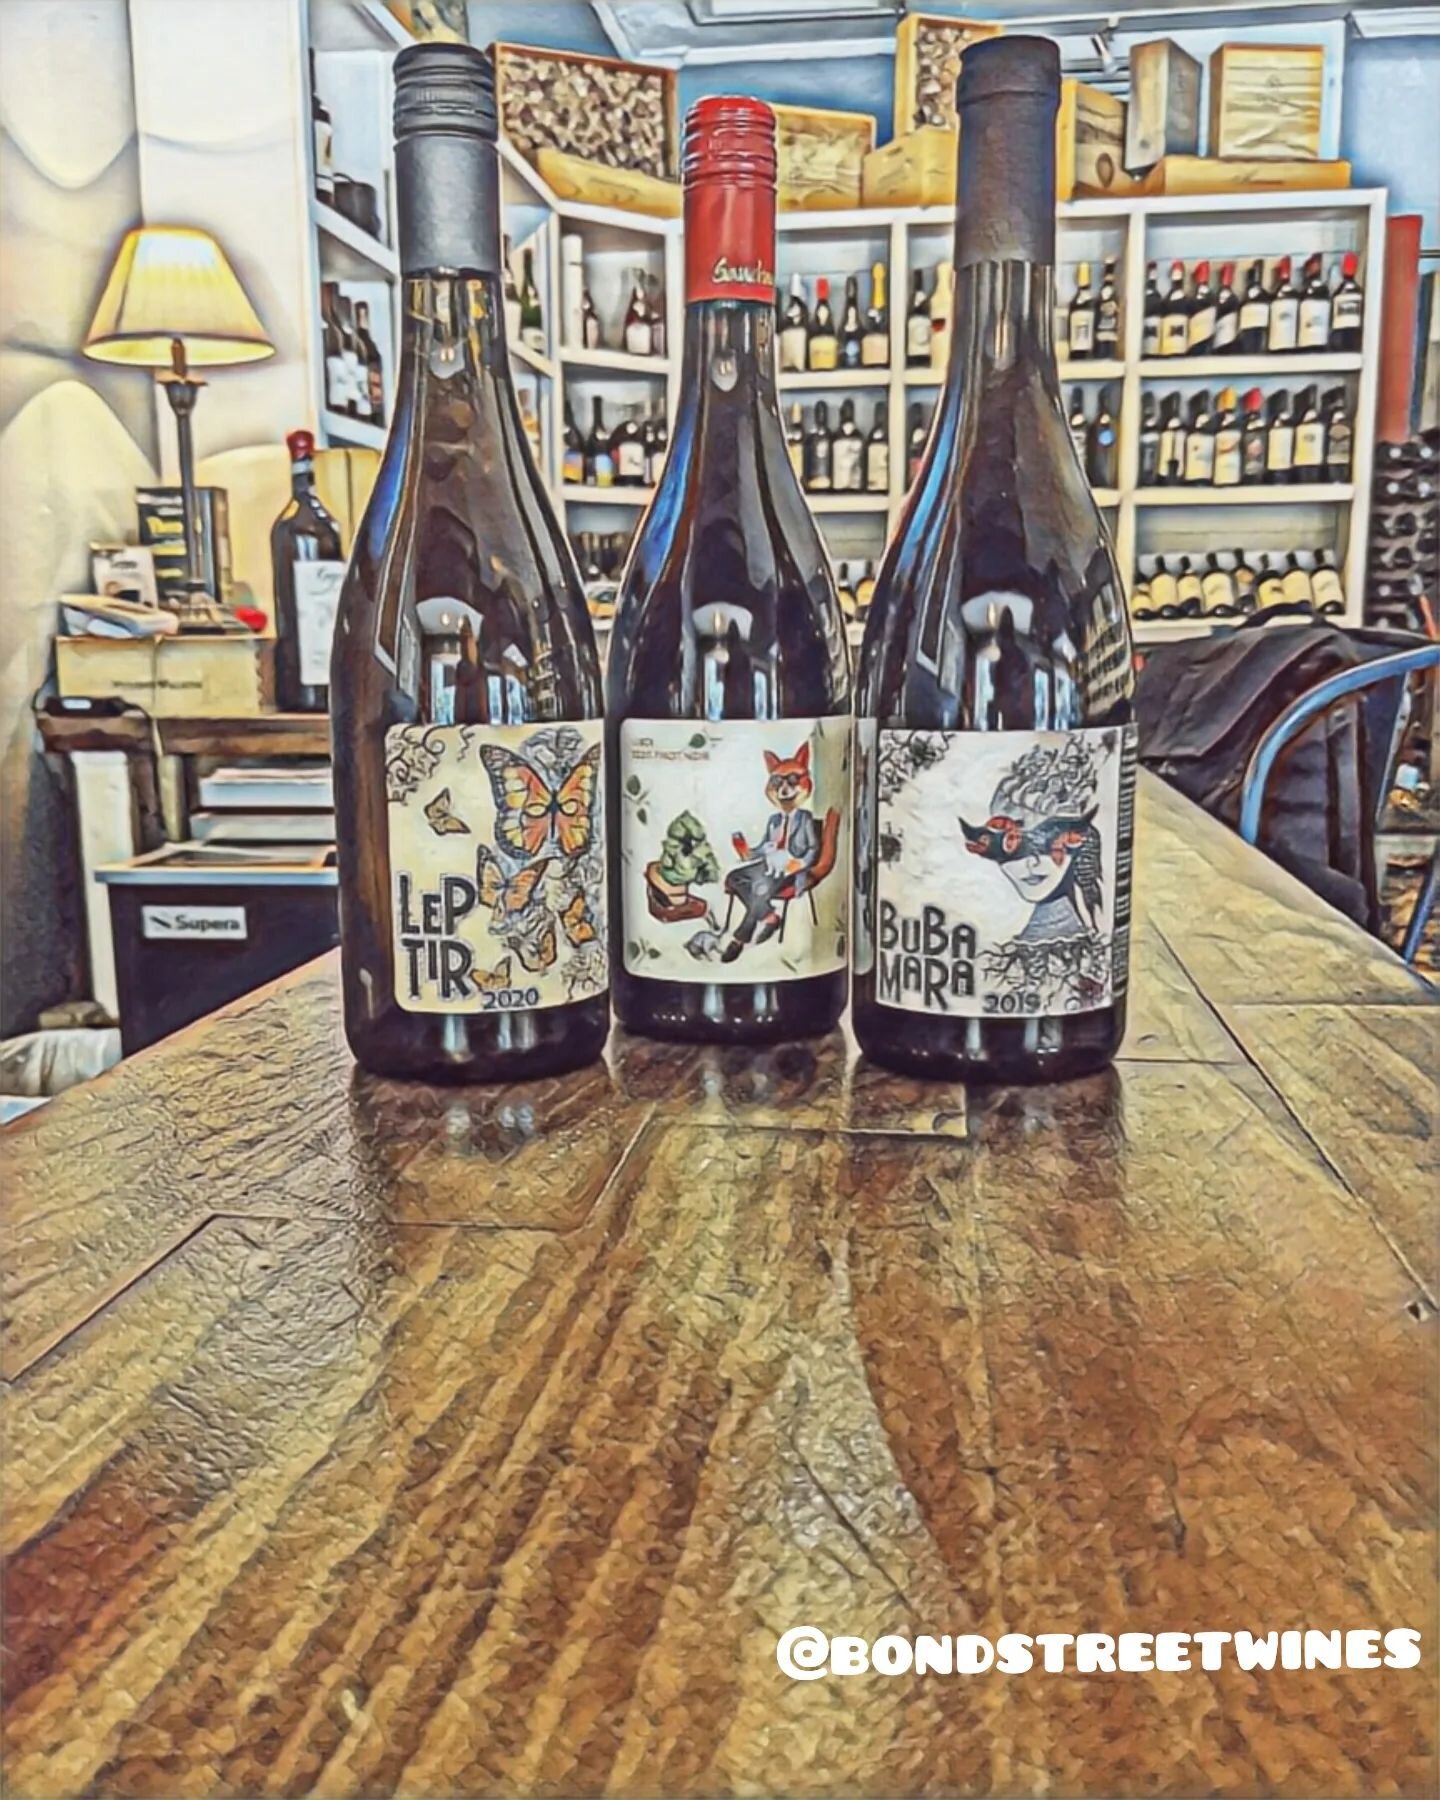 This weekend we are tasting some great wines from @vina_sanctum! 
Try all three for free Friday and Saturday all day!